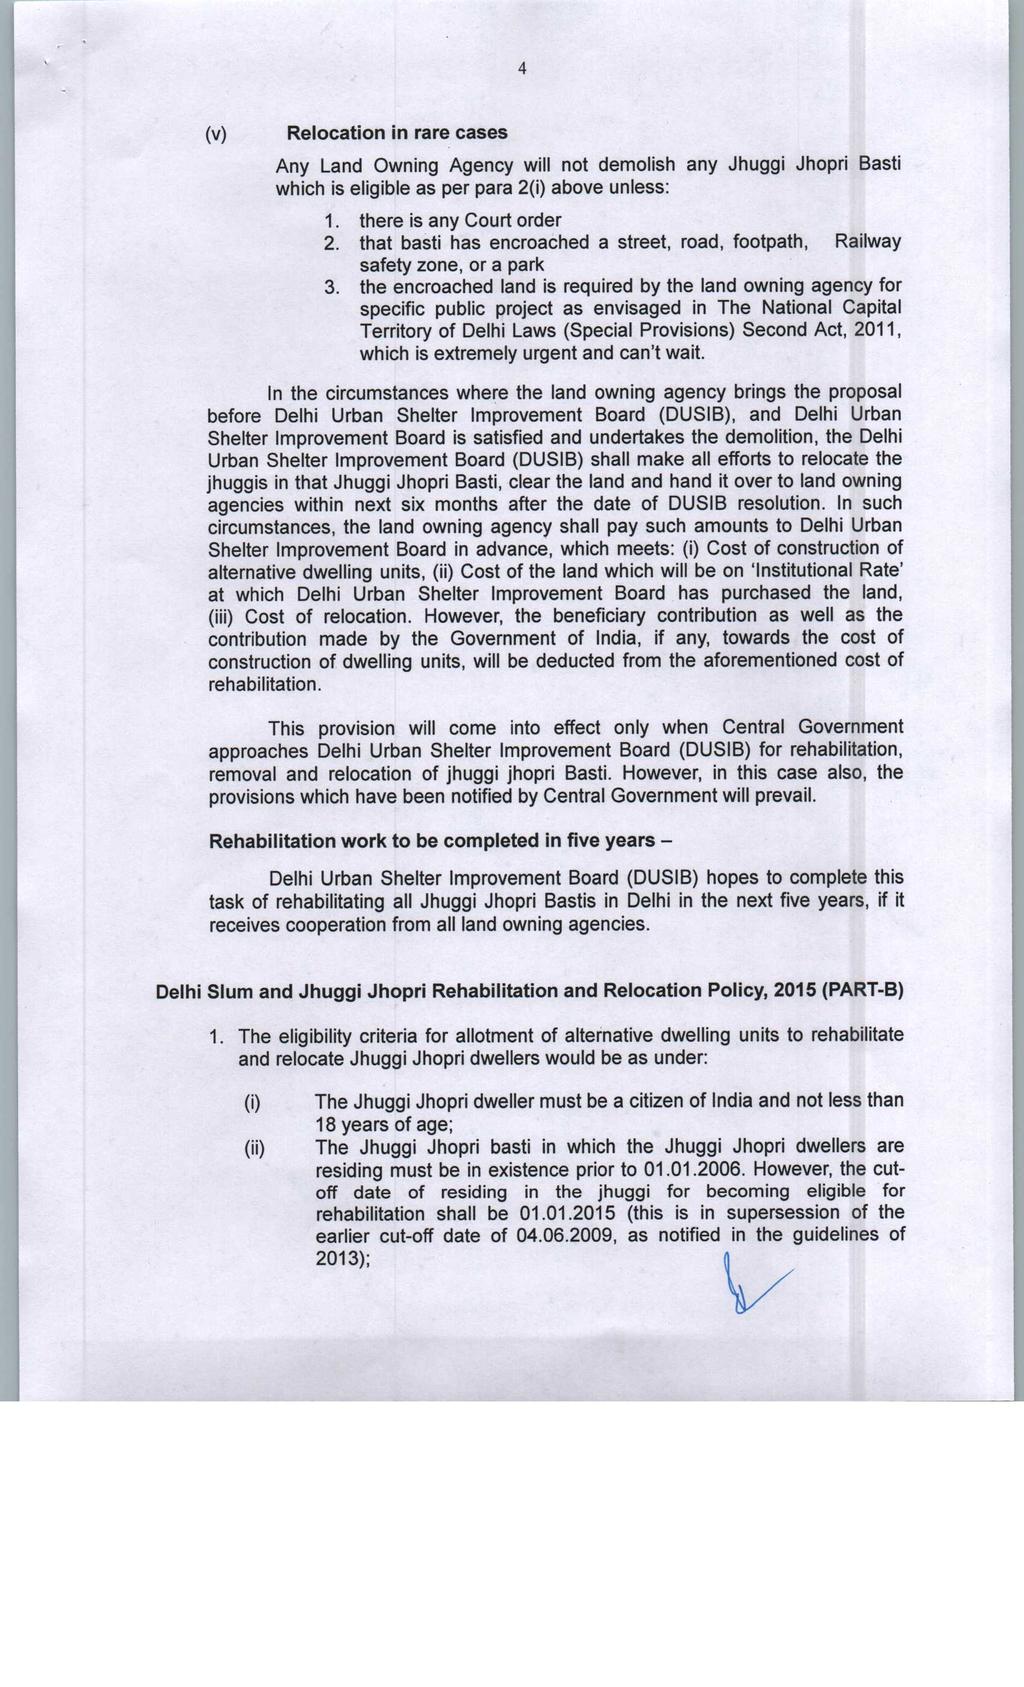 (v)relocation in rare cases Any Land Owning Agency will not demolish any Jhuggi Jhopri Basti which is eligible as per para 2(i) above unless: 1.there is any Court order 2.